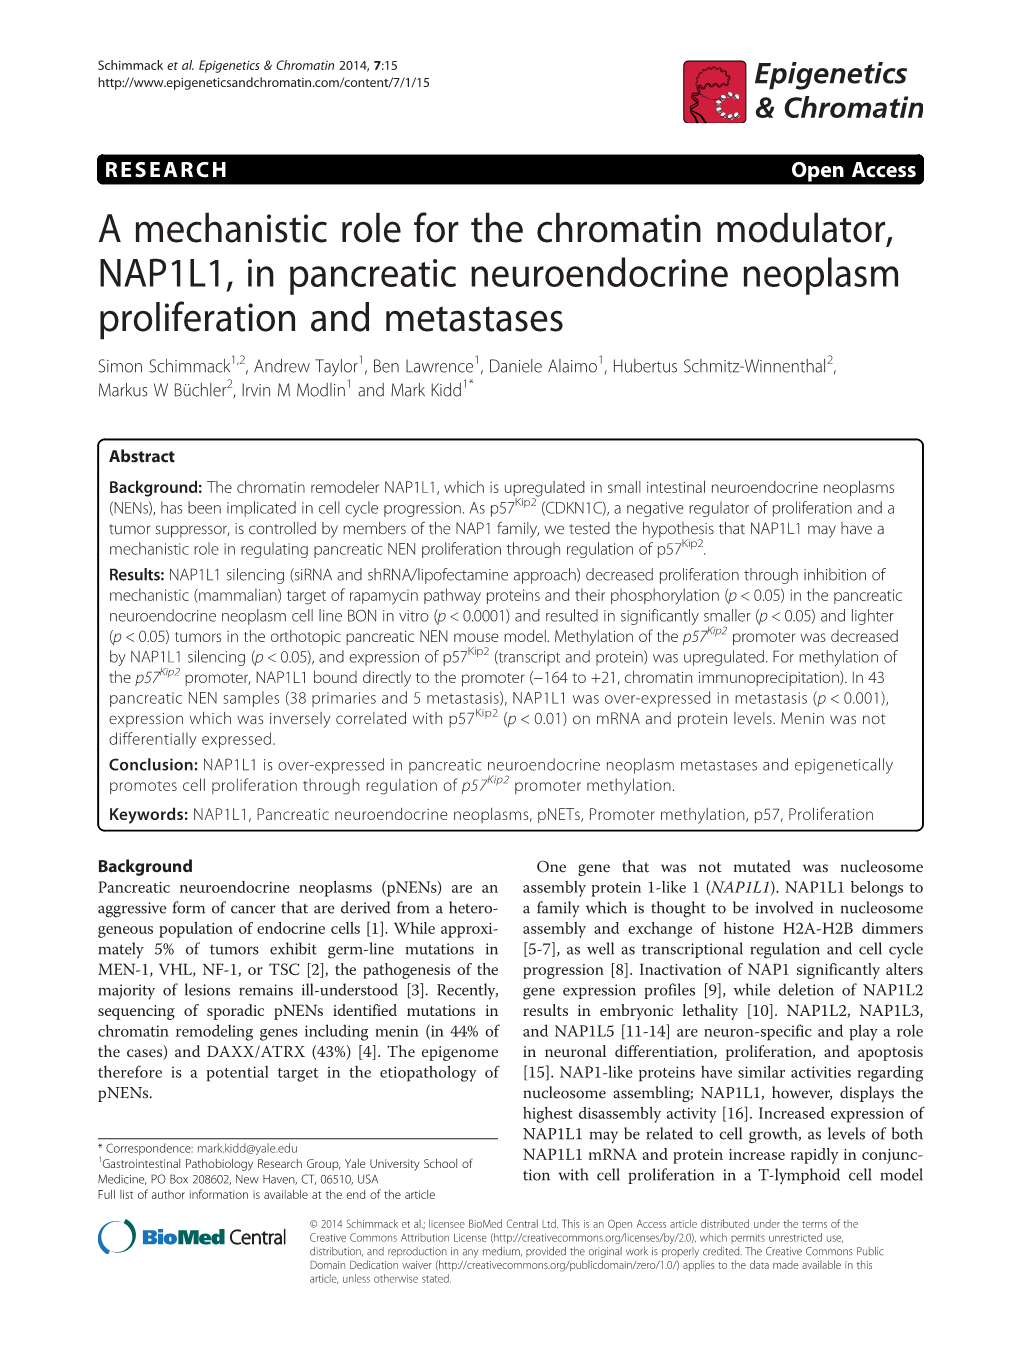 A Mechanistic Role for the Chromatin Modulator, NAP1L1, in Pancreatic Neuroendocrine Neoplasm Proliferation and Metastases